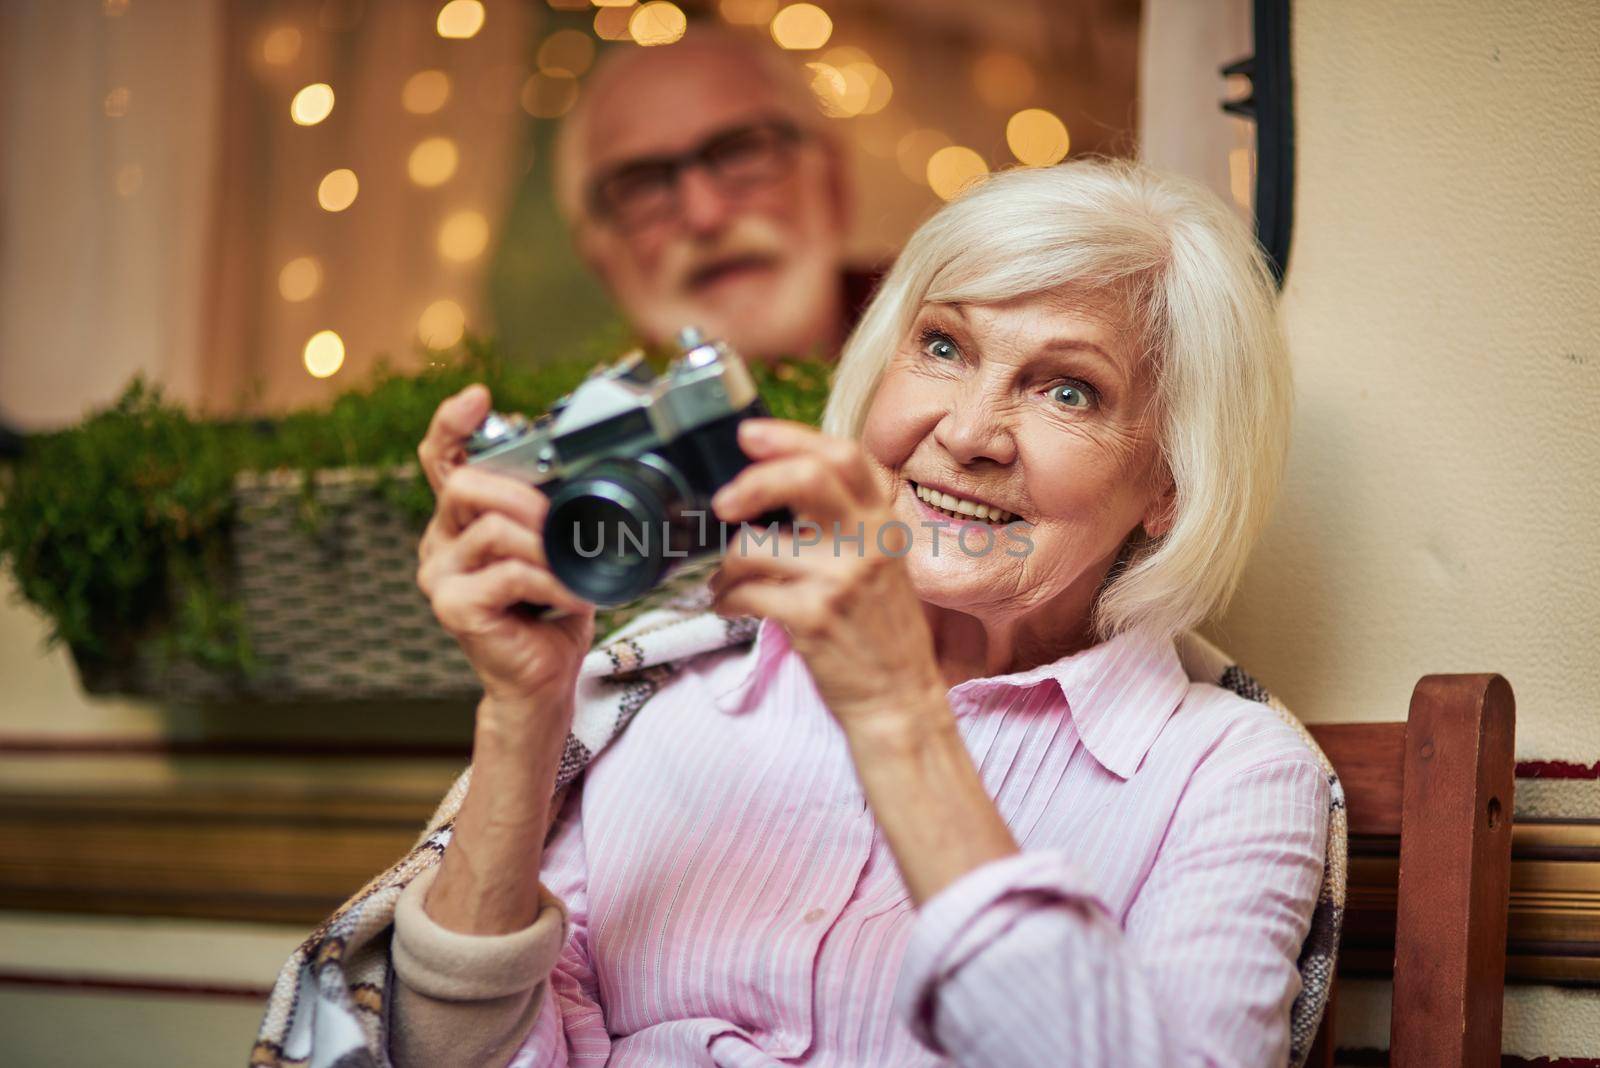 Smiling beautiful woman holding camera and going to make photo with her husband in the motorhome on the background. Travel concept